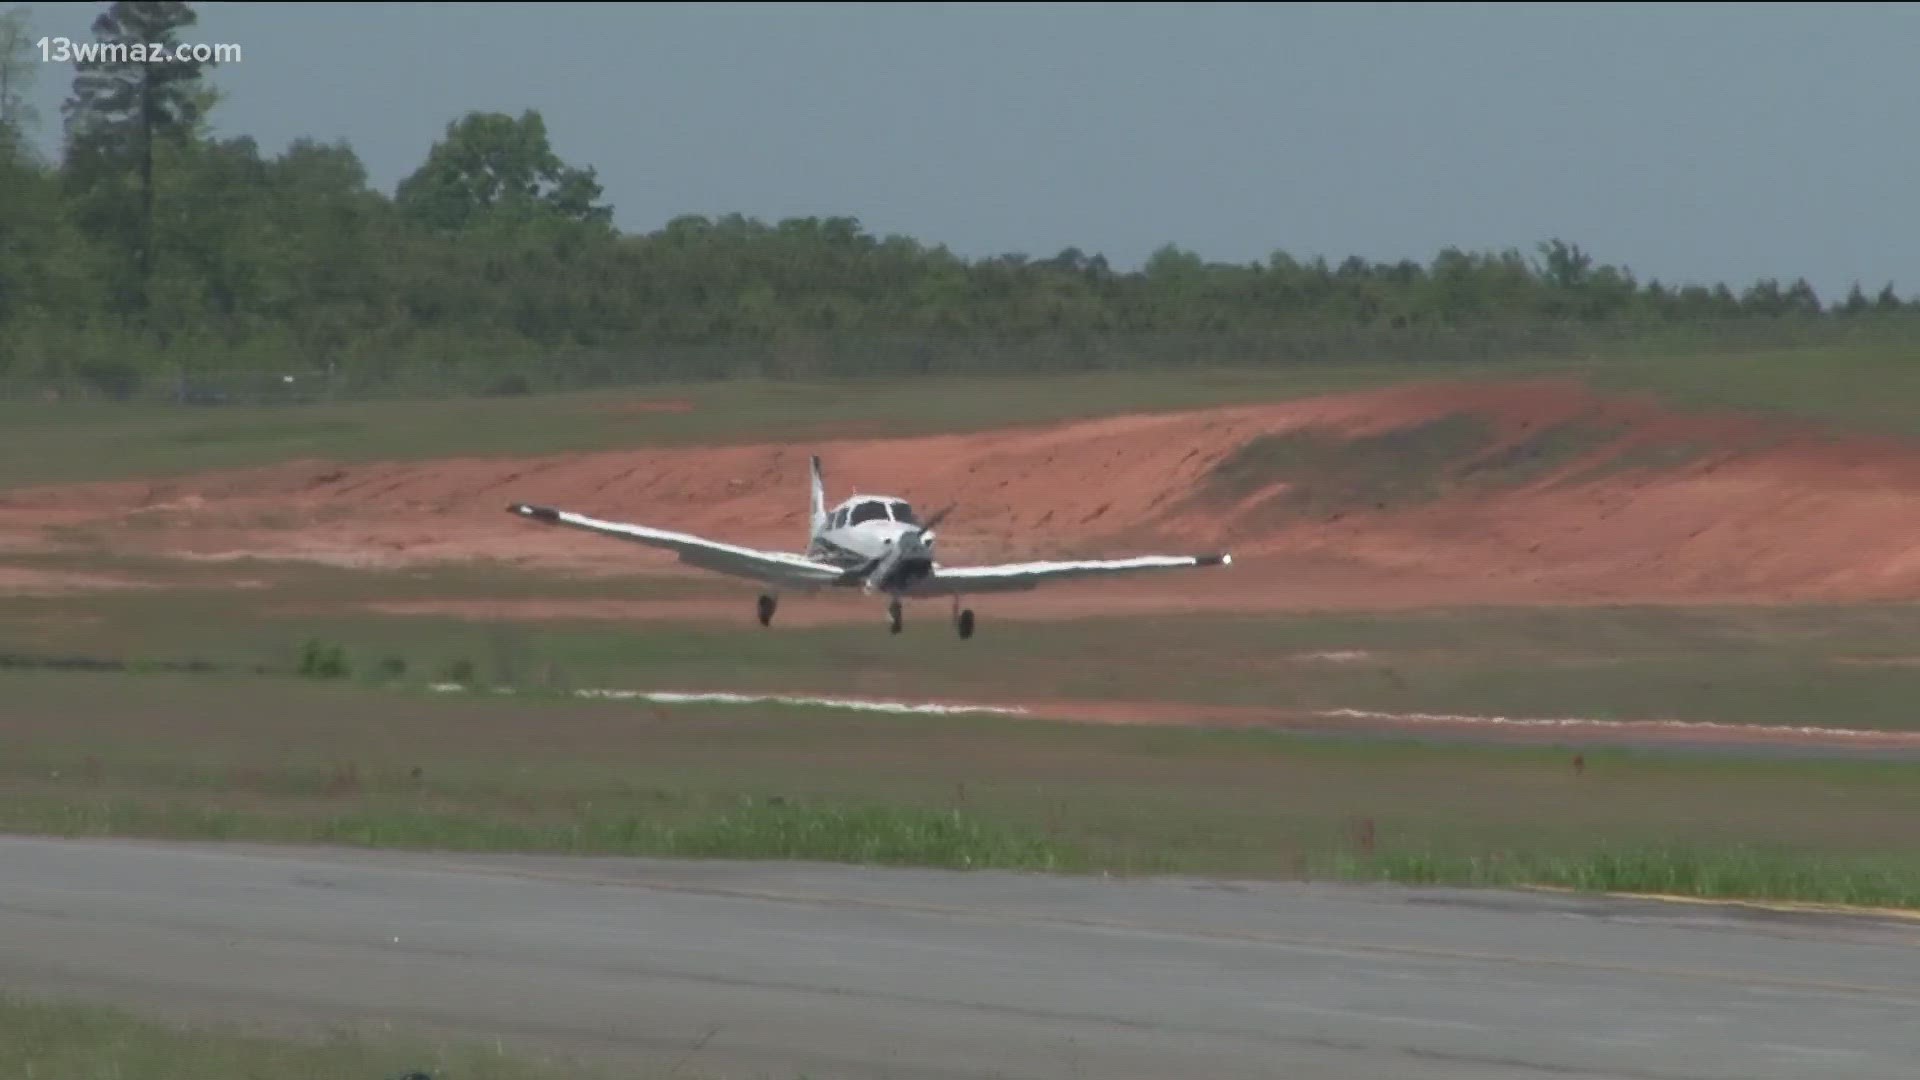 20 flights a day, 13,000 flights a year, and 30 visitors come through the Baldwin County airport every day.